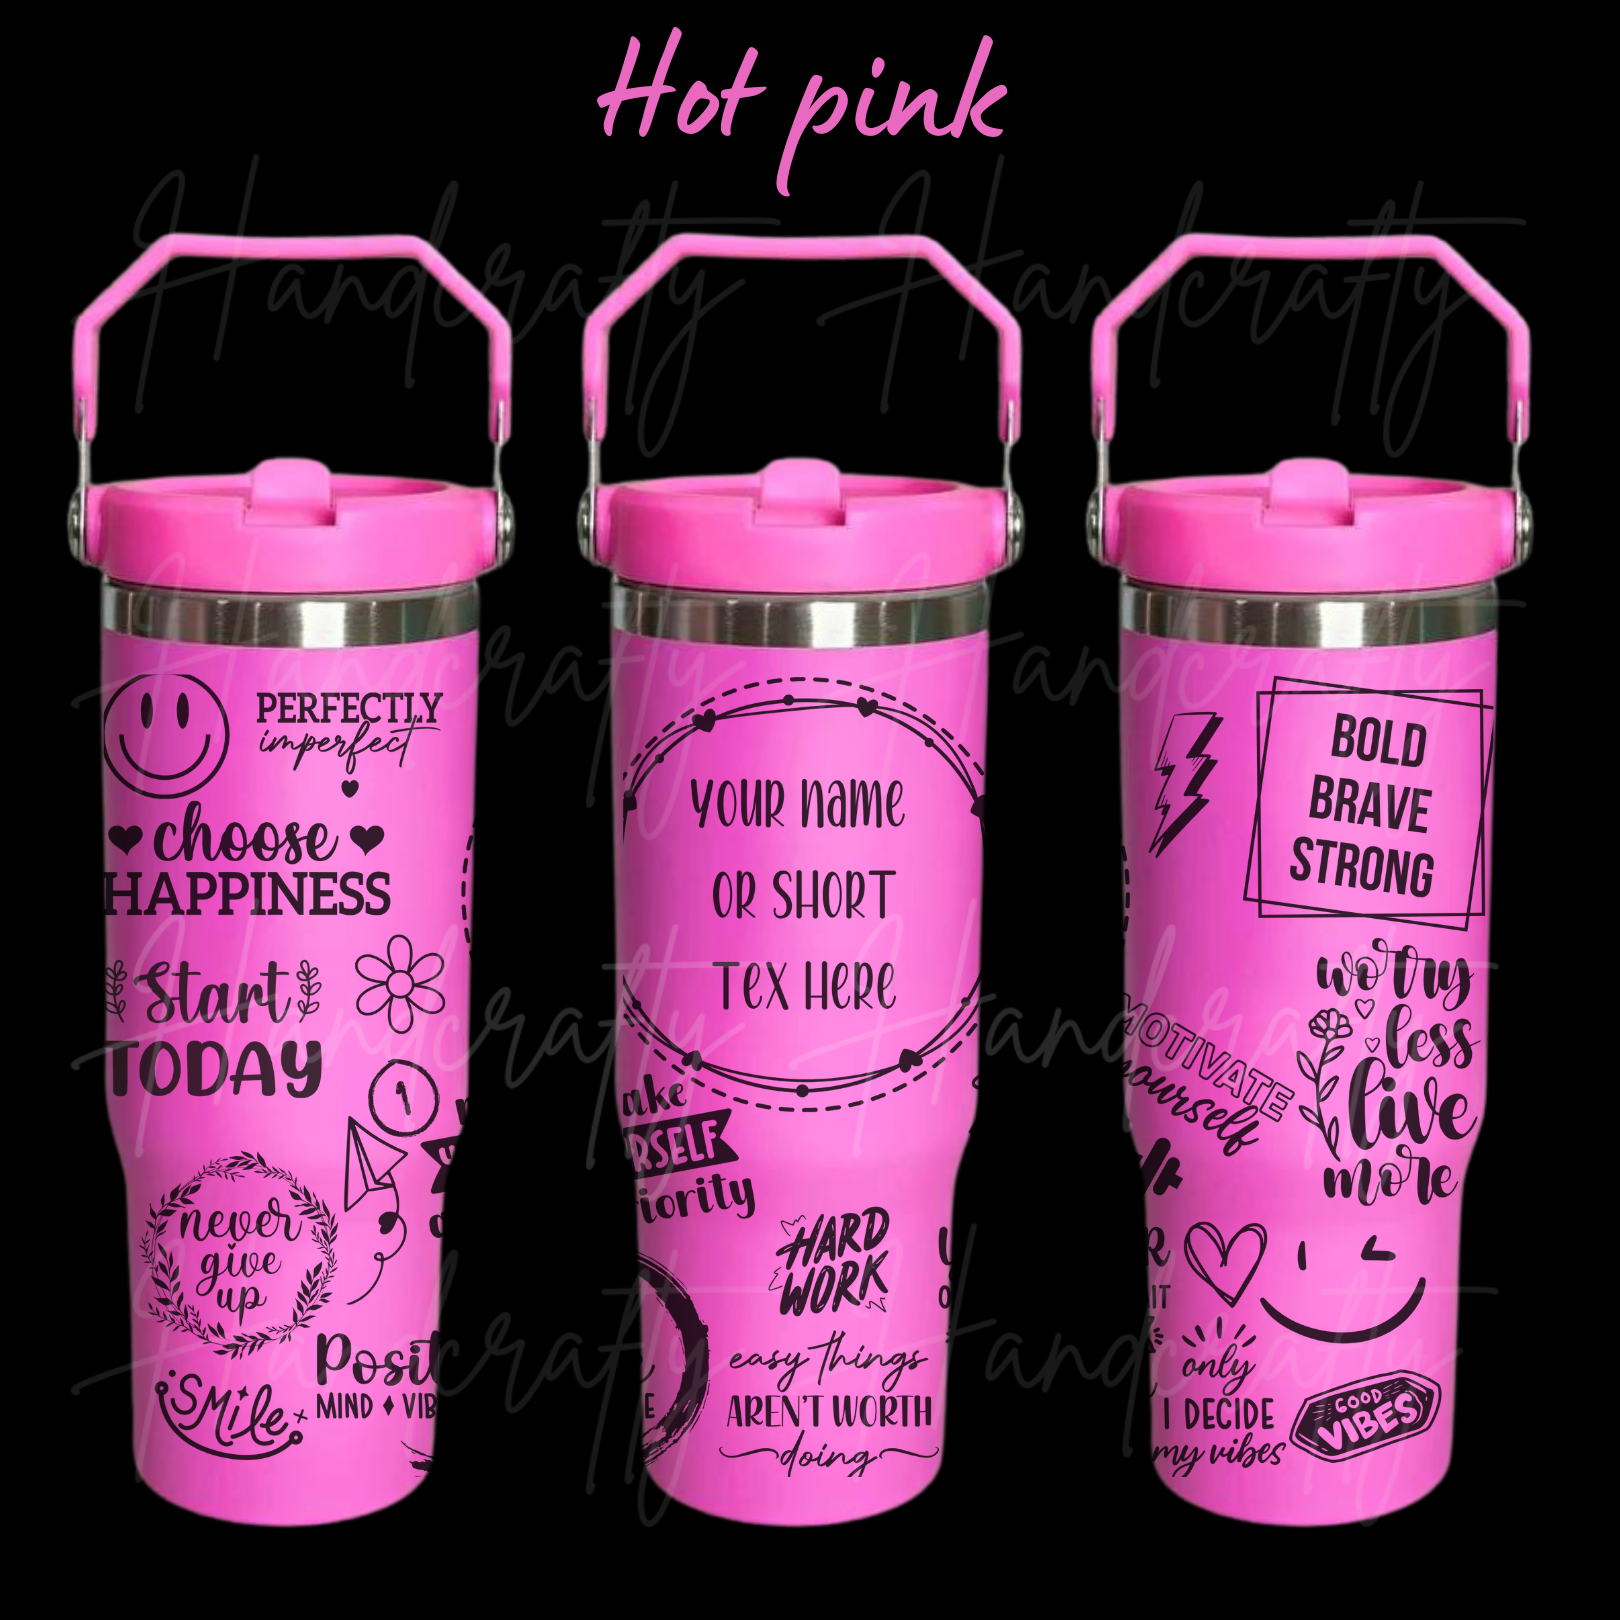  motivational gift, tumbler for gift, gift ideas, personalized tumbler, self love motivational insulated tumbler daily affirmations, inspirational quotes, positive affirmationstumbler, mental health tumbler, self esteem tumbler, stainless steel tumbler, insulated motivational tumbler, double wall stainless steel tumbler for self esteem, laser engraved motivational tumbler, laser engraved self esteem tumbler, laser engraved mental health tumbler, stanley dupe laser engraved